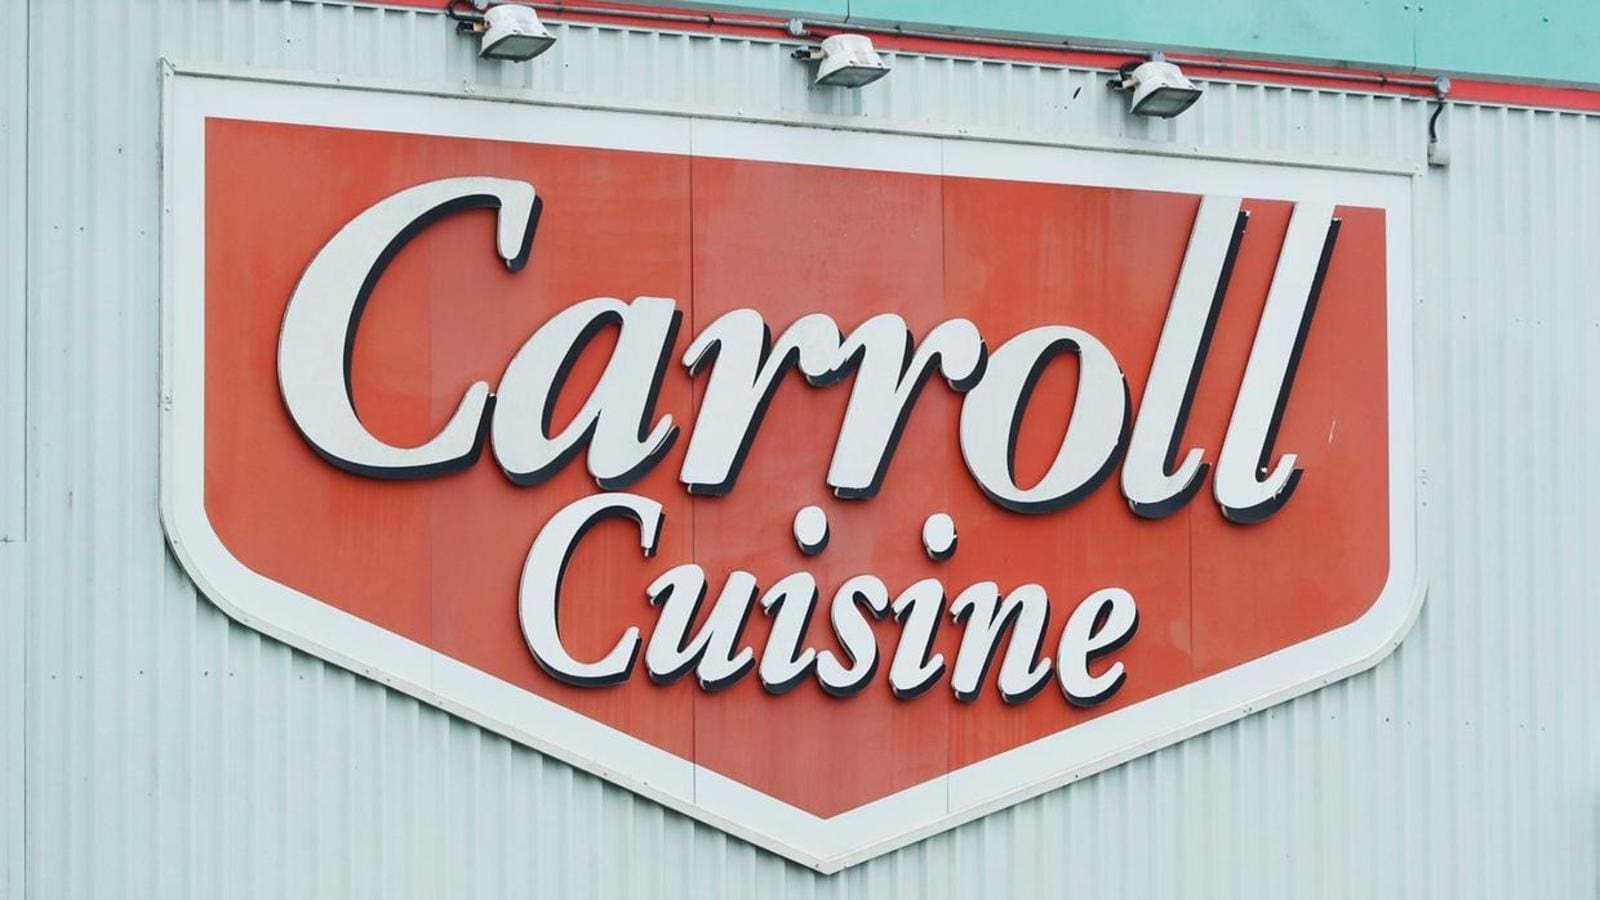 UK’s Eight Fifty Food Group acquires Carroll’s Cuisine from Carlyle Cardinal Ireland